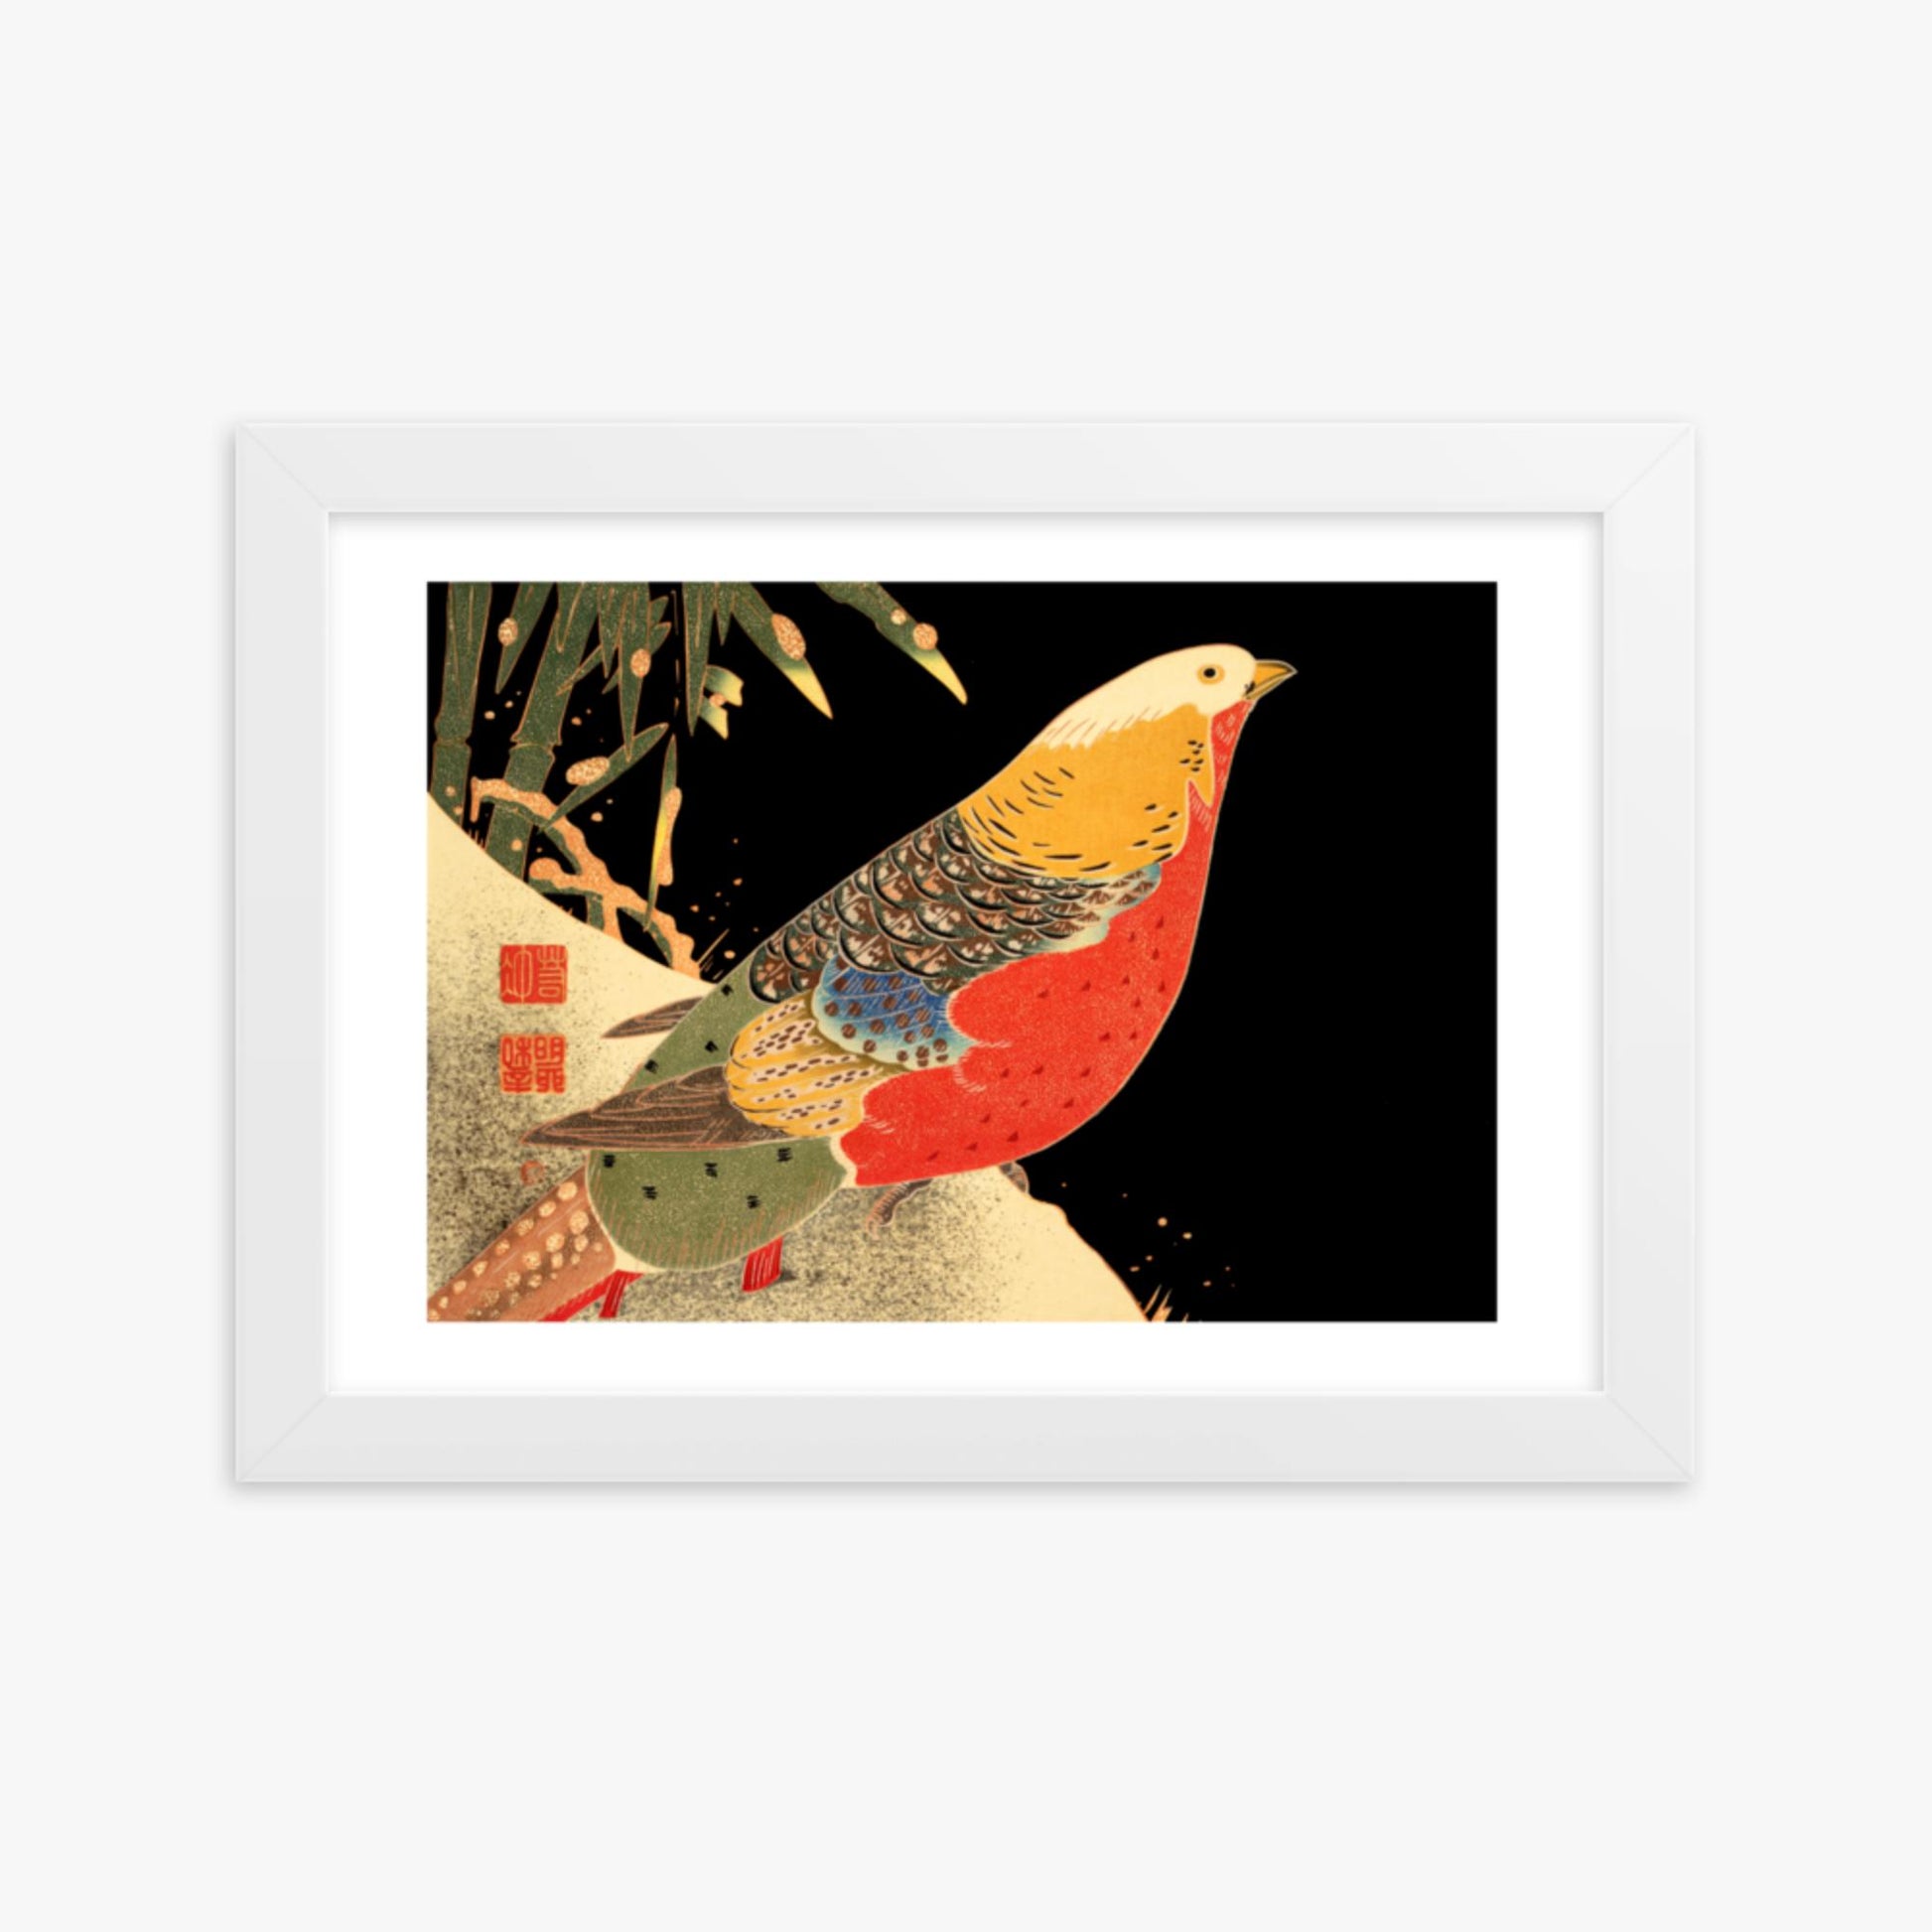 Ito Jakuchu - Golden Pheasant in the Snow 21x30 cm Poster With White Frame